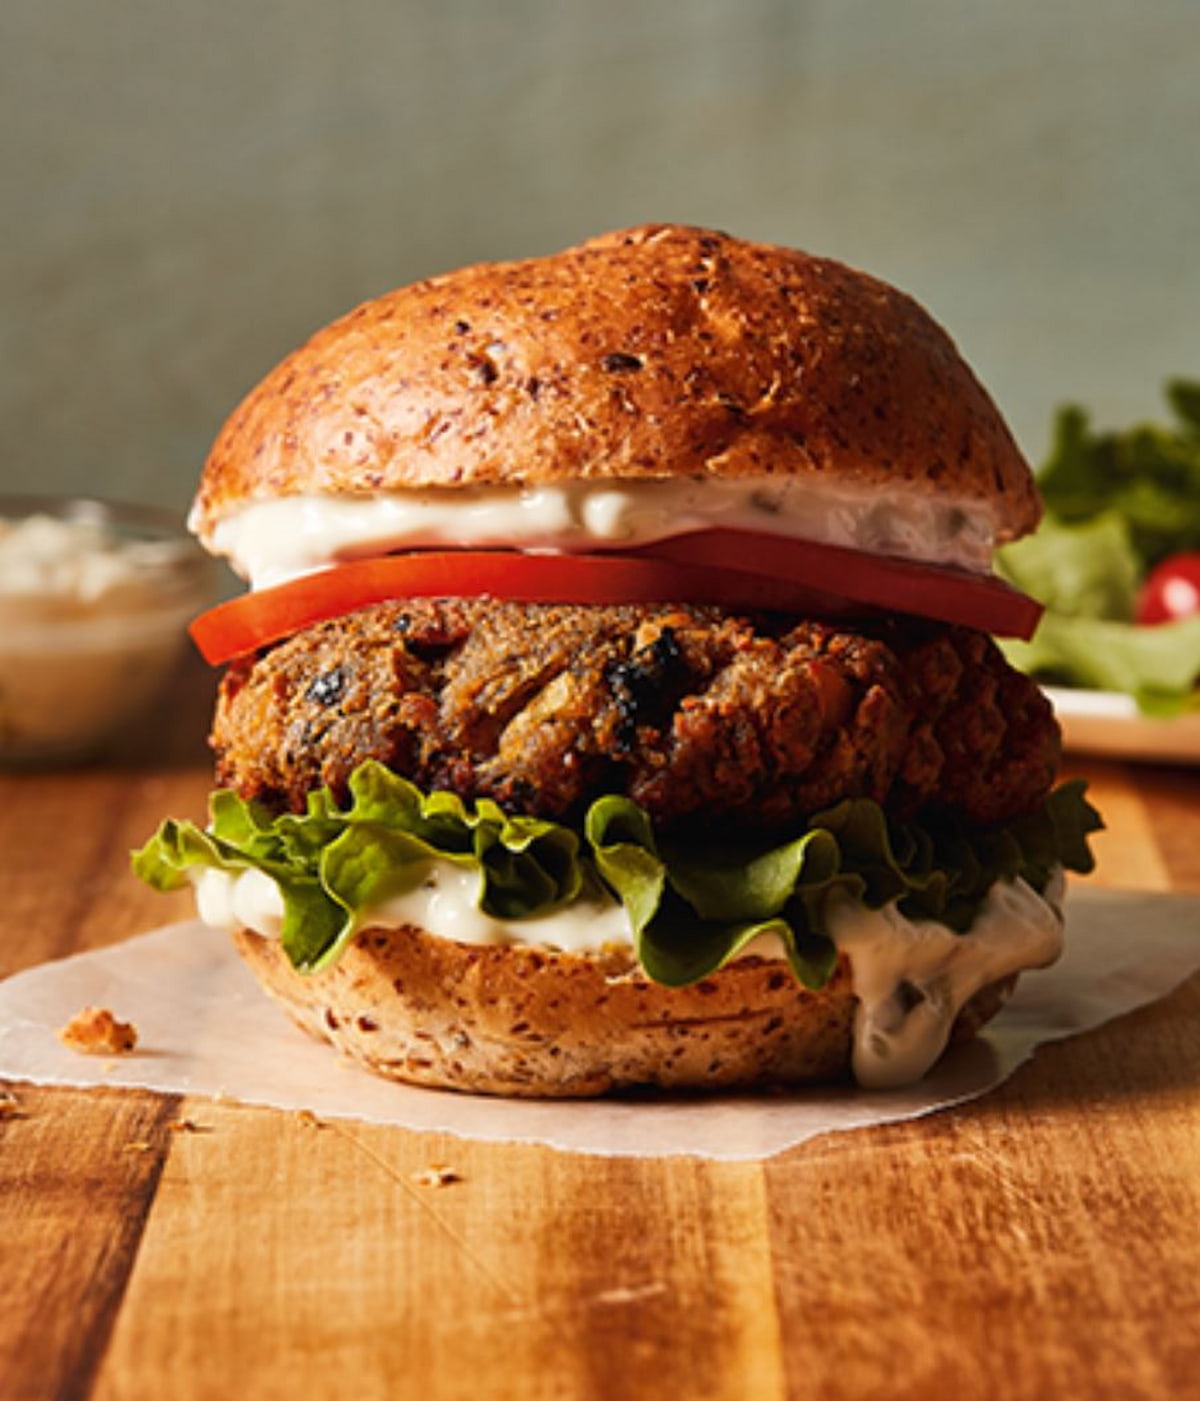 A vegan burger with sauce, tomato, and lettuce.